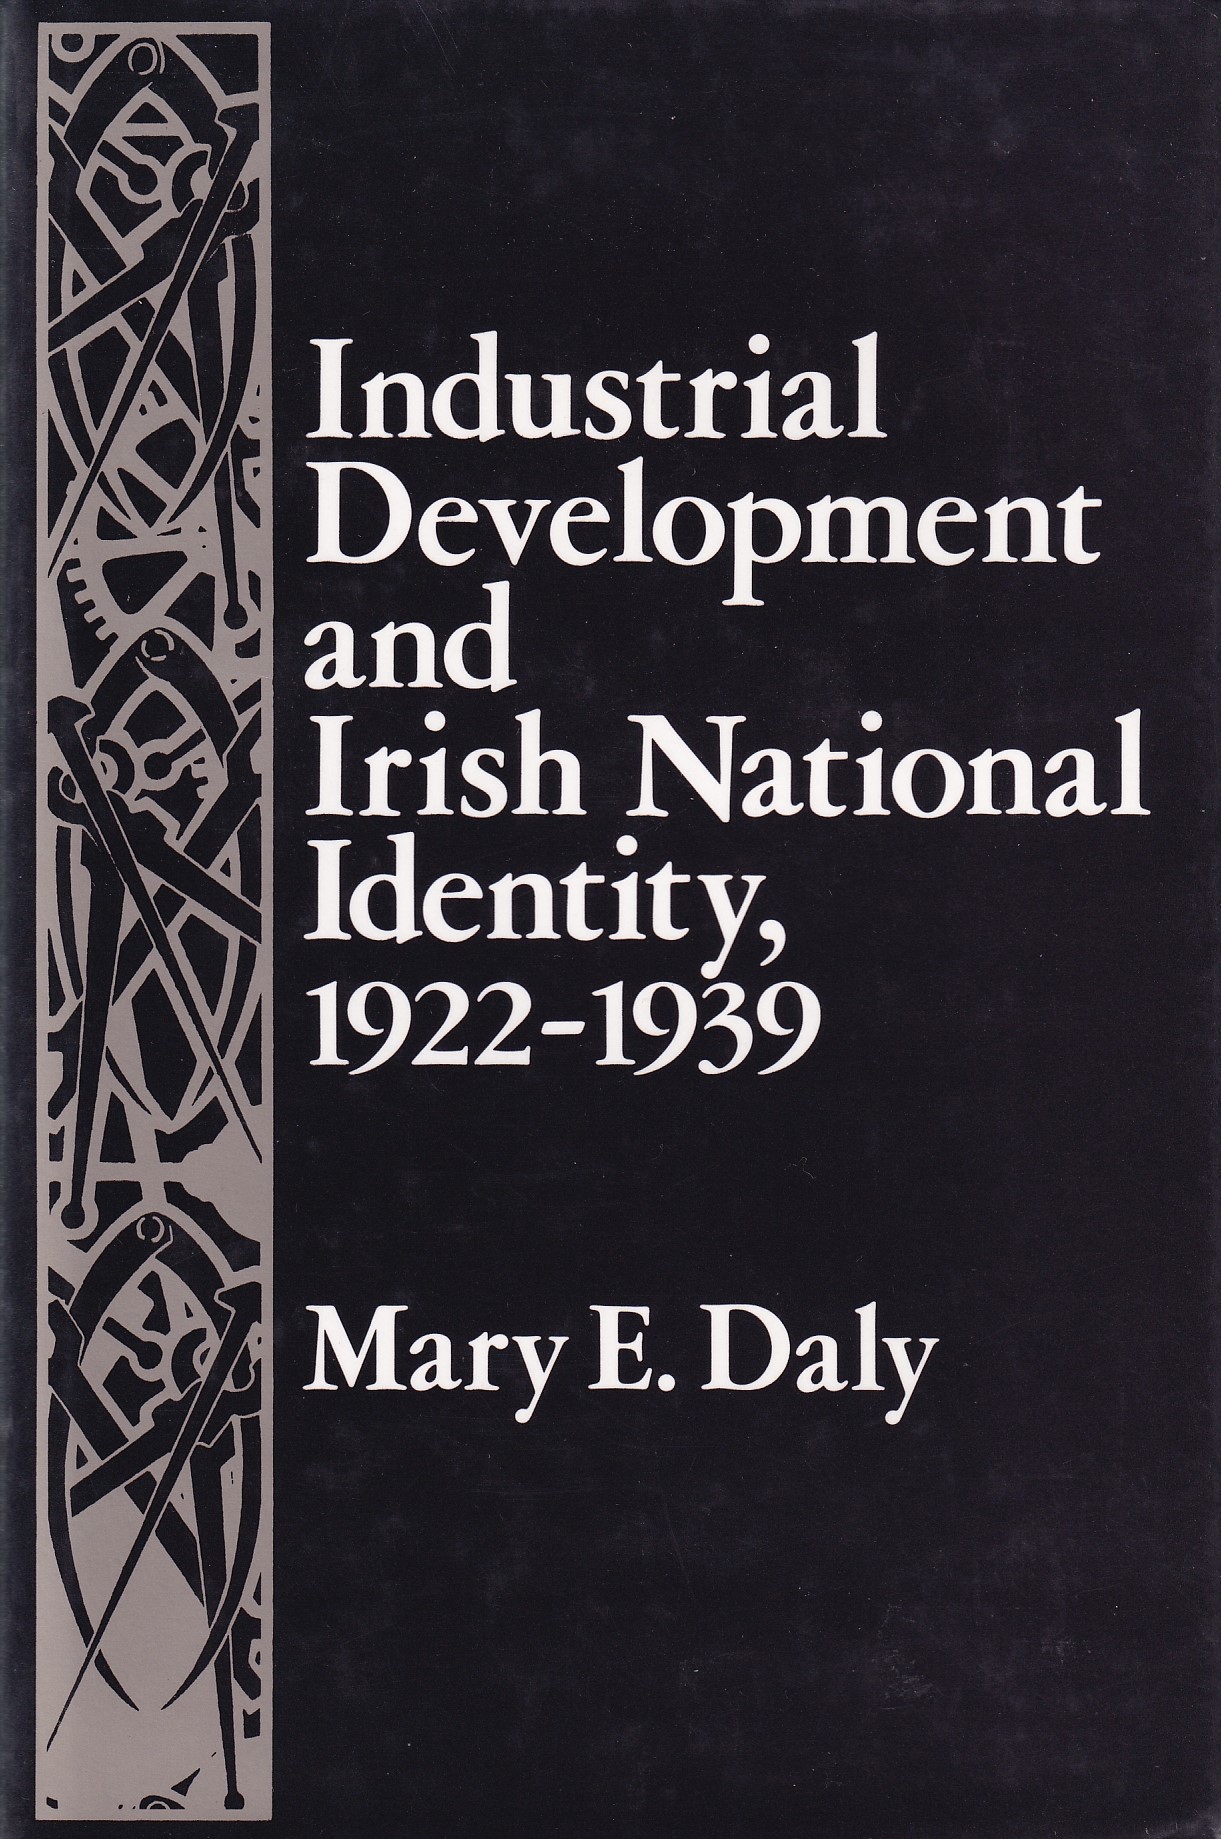 Industrial Development and Irish National Identity, 1922-1939 | Mary E. Daly | Charlie Byrne's